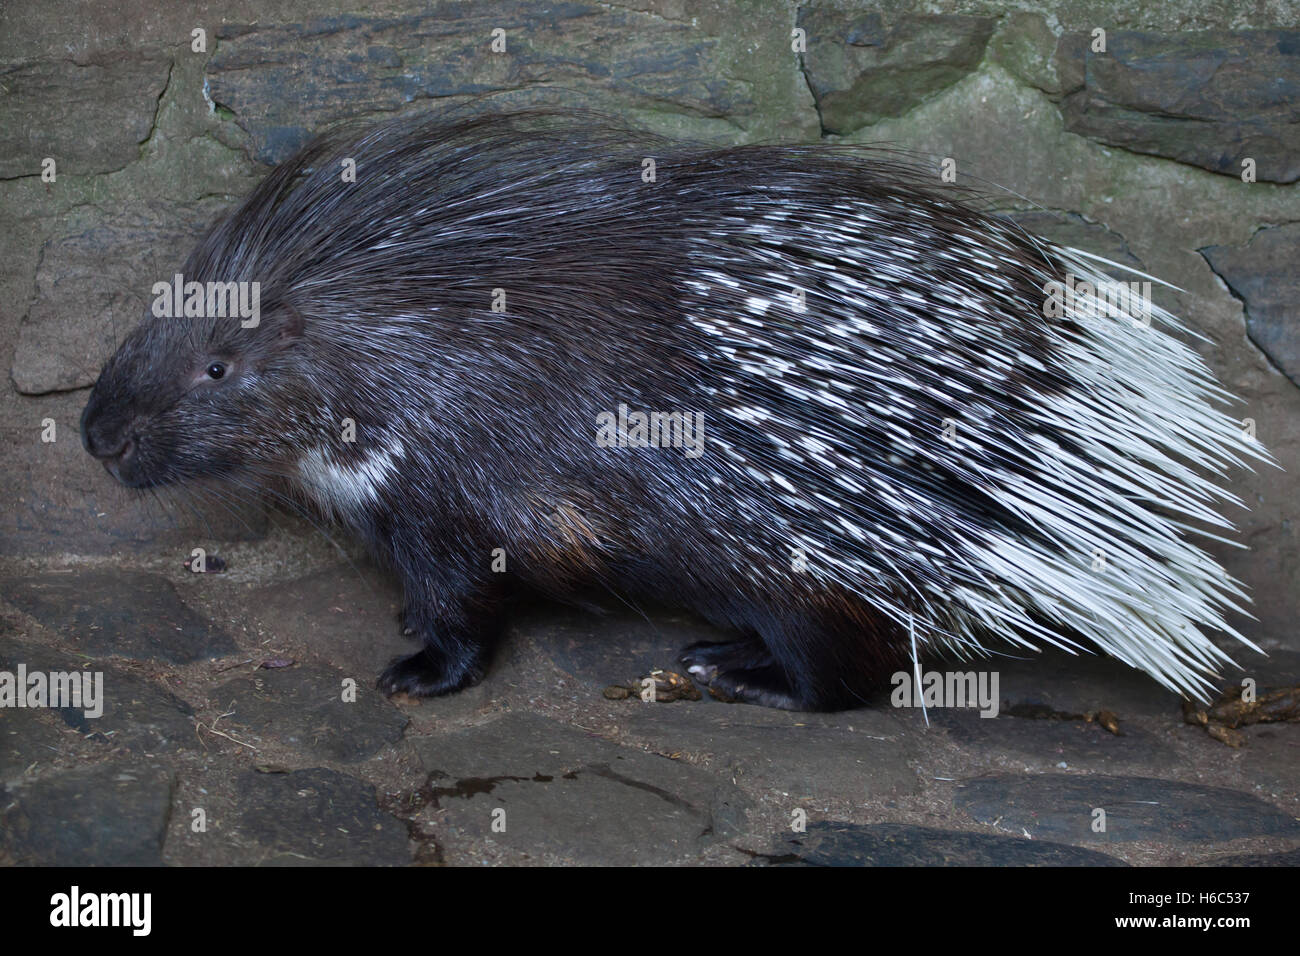 Indian crested porcupine (Hystrix indica), also known as the Indian porcupine. Wildlife animal. Stock Photo